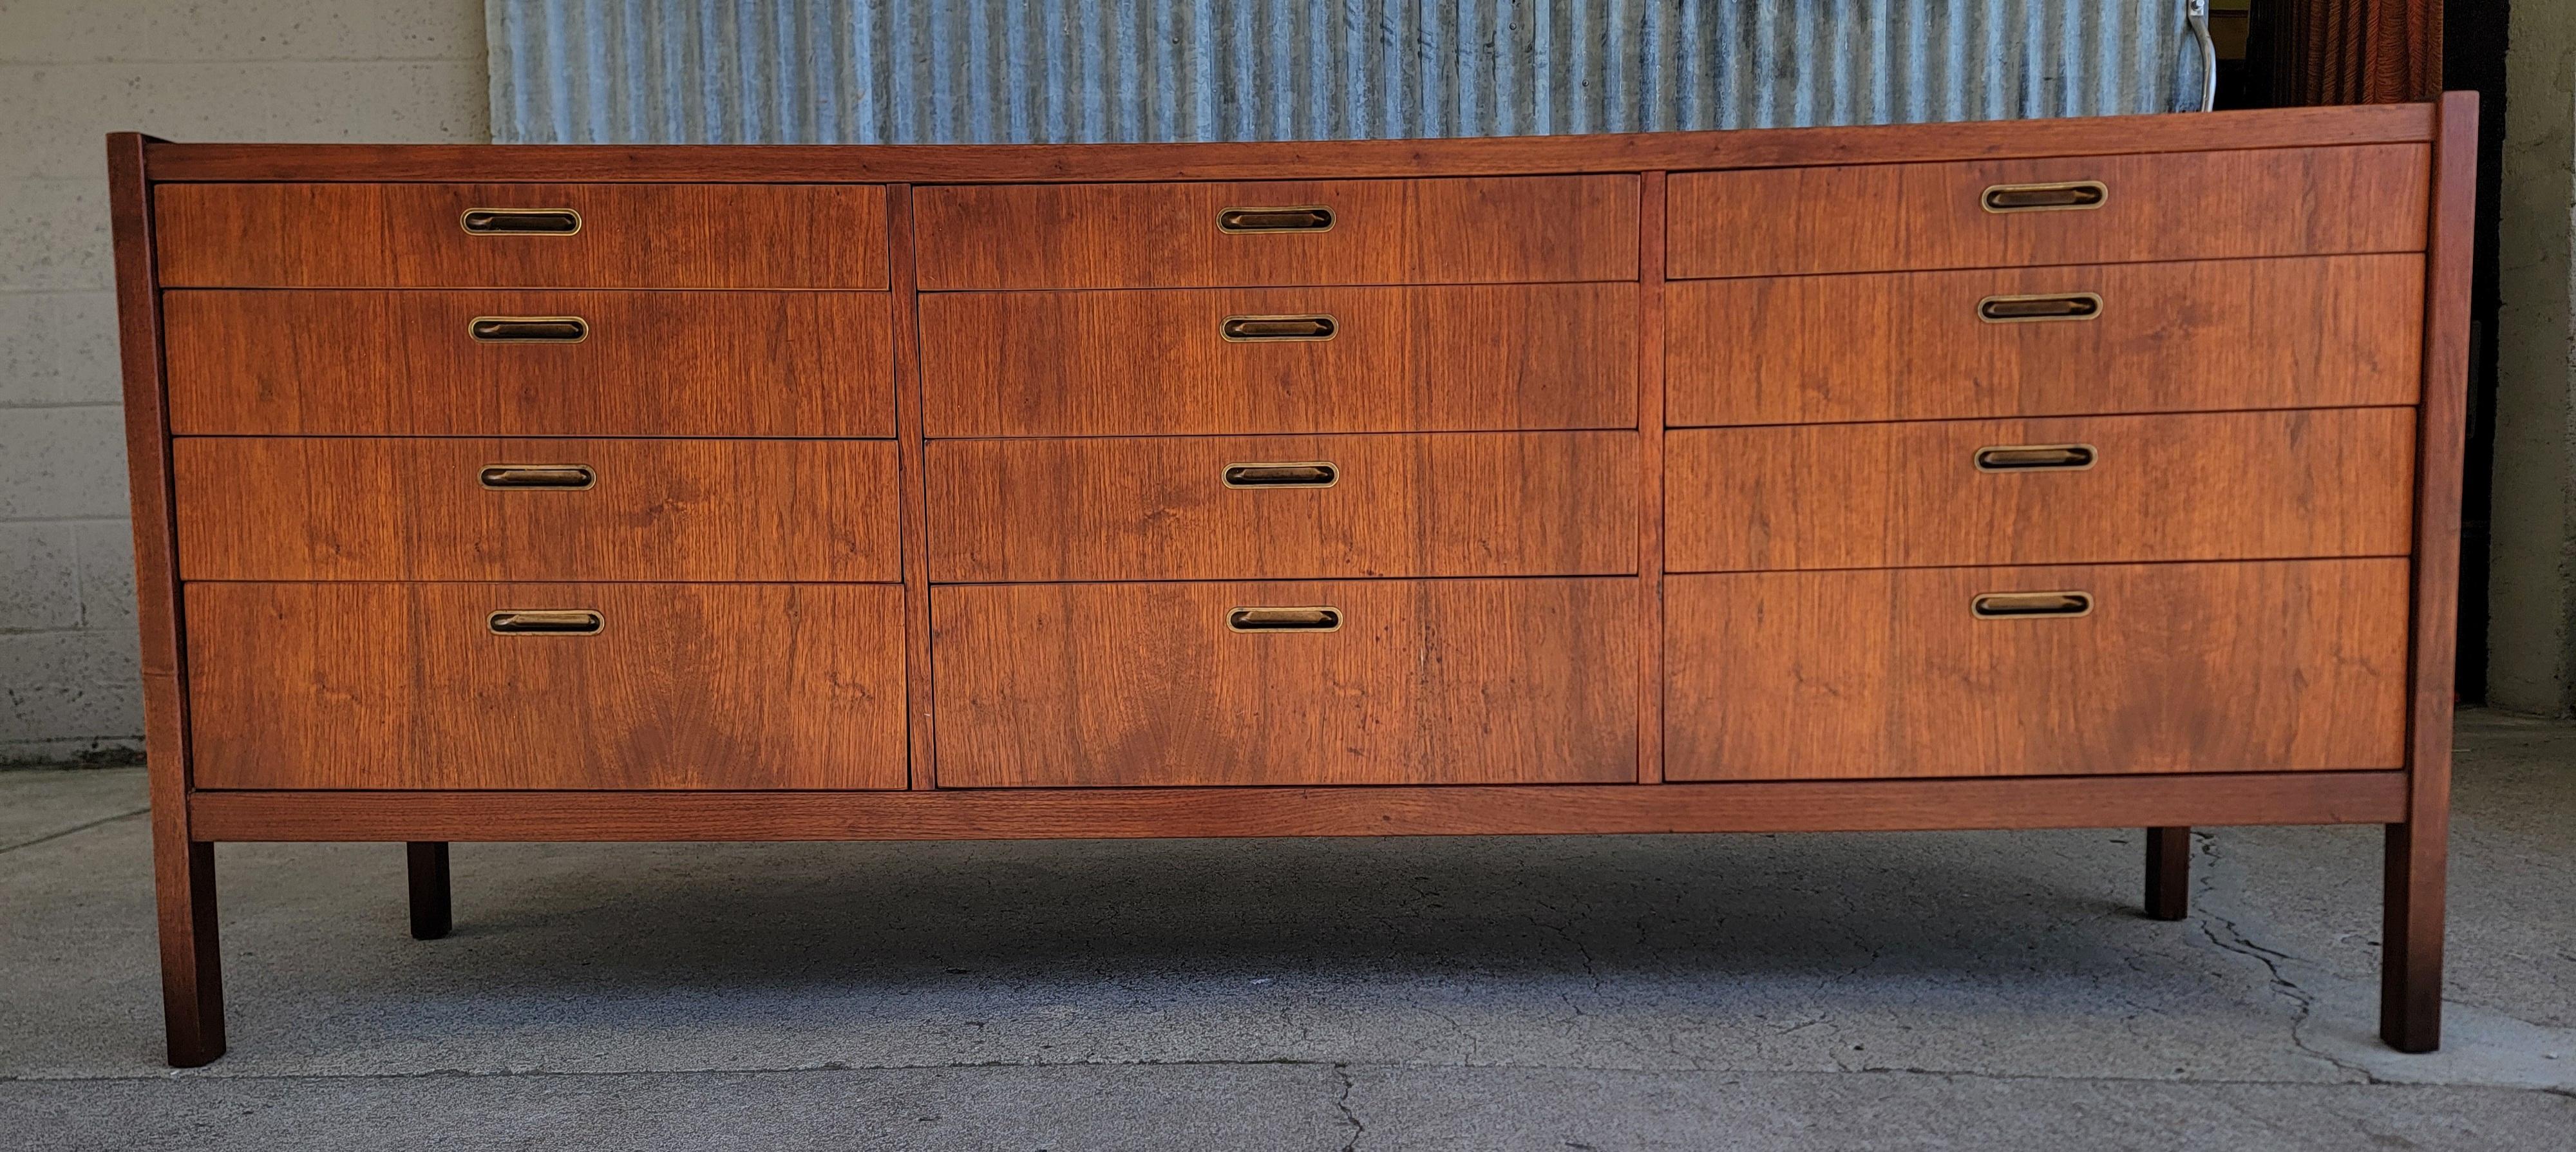 Mid-Century Modern Long Low Dresser 12 Drawers For Sale 7